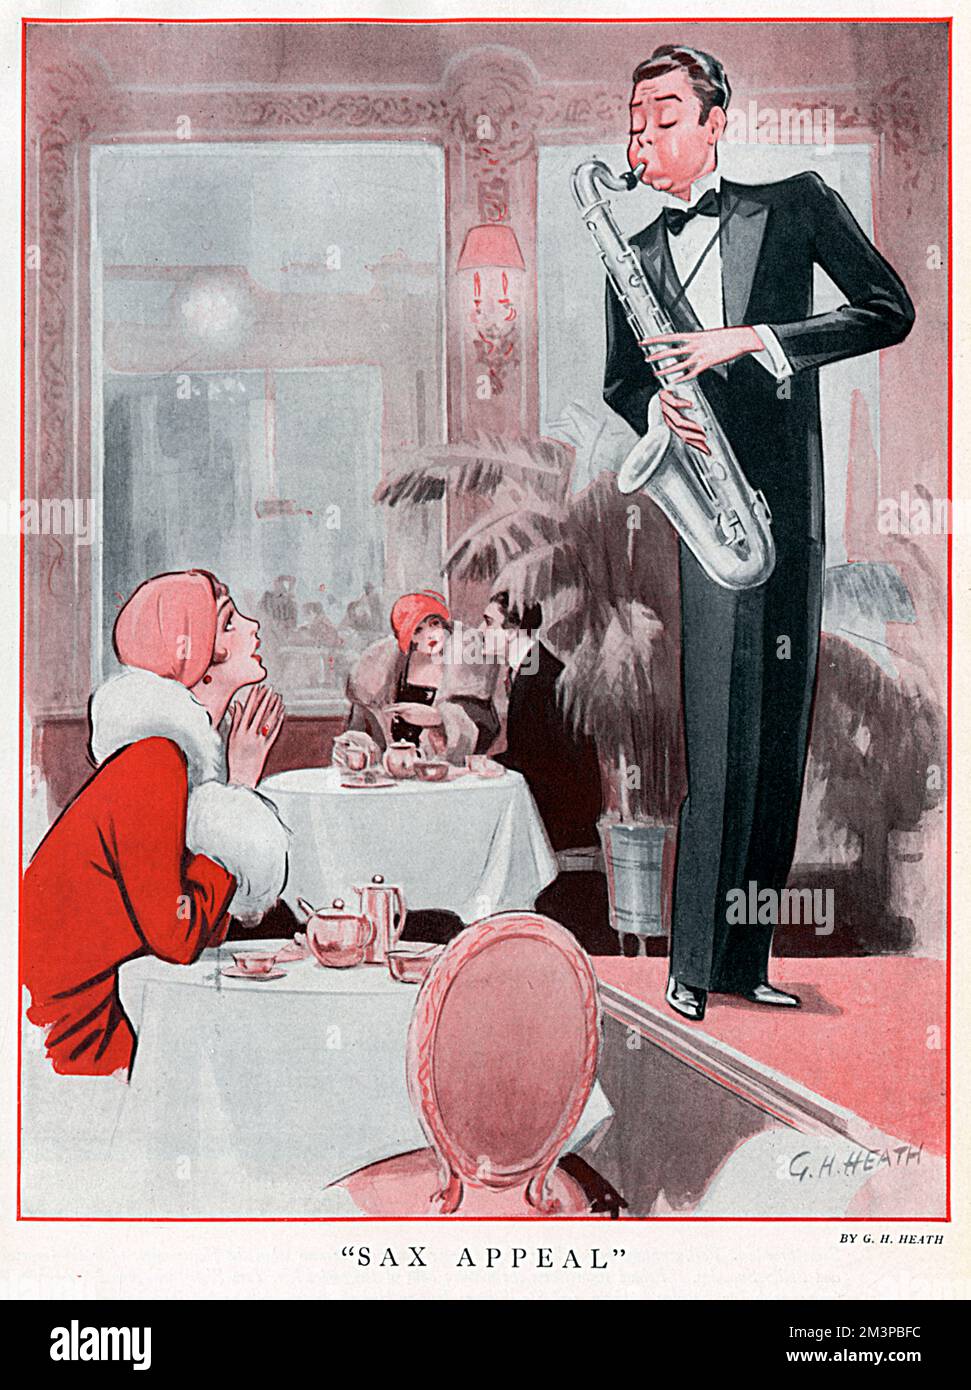 A young woman in a caf&#x982f;r restaurant, sits entranced by a saxophone player who appears to be playing a tune just for her.      Date: 1929 Stock Photo